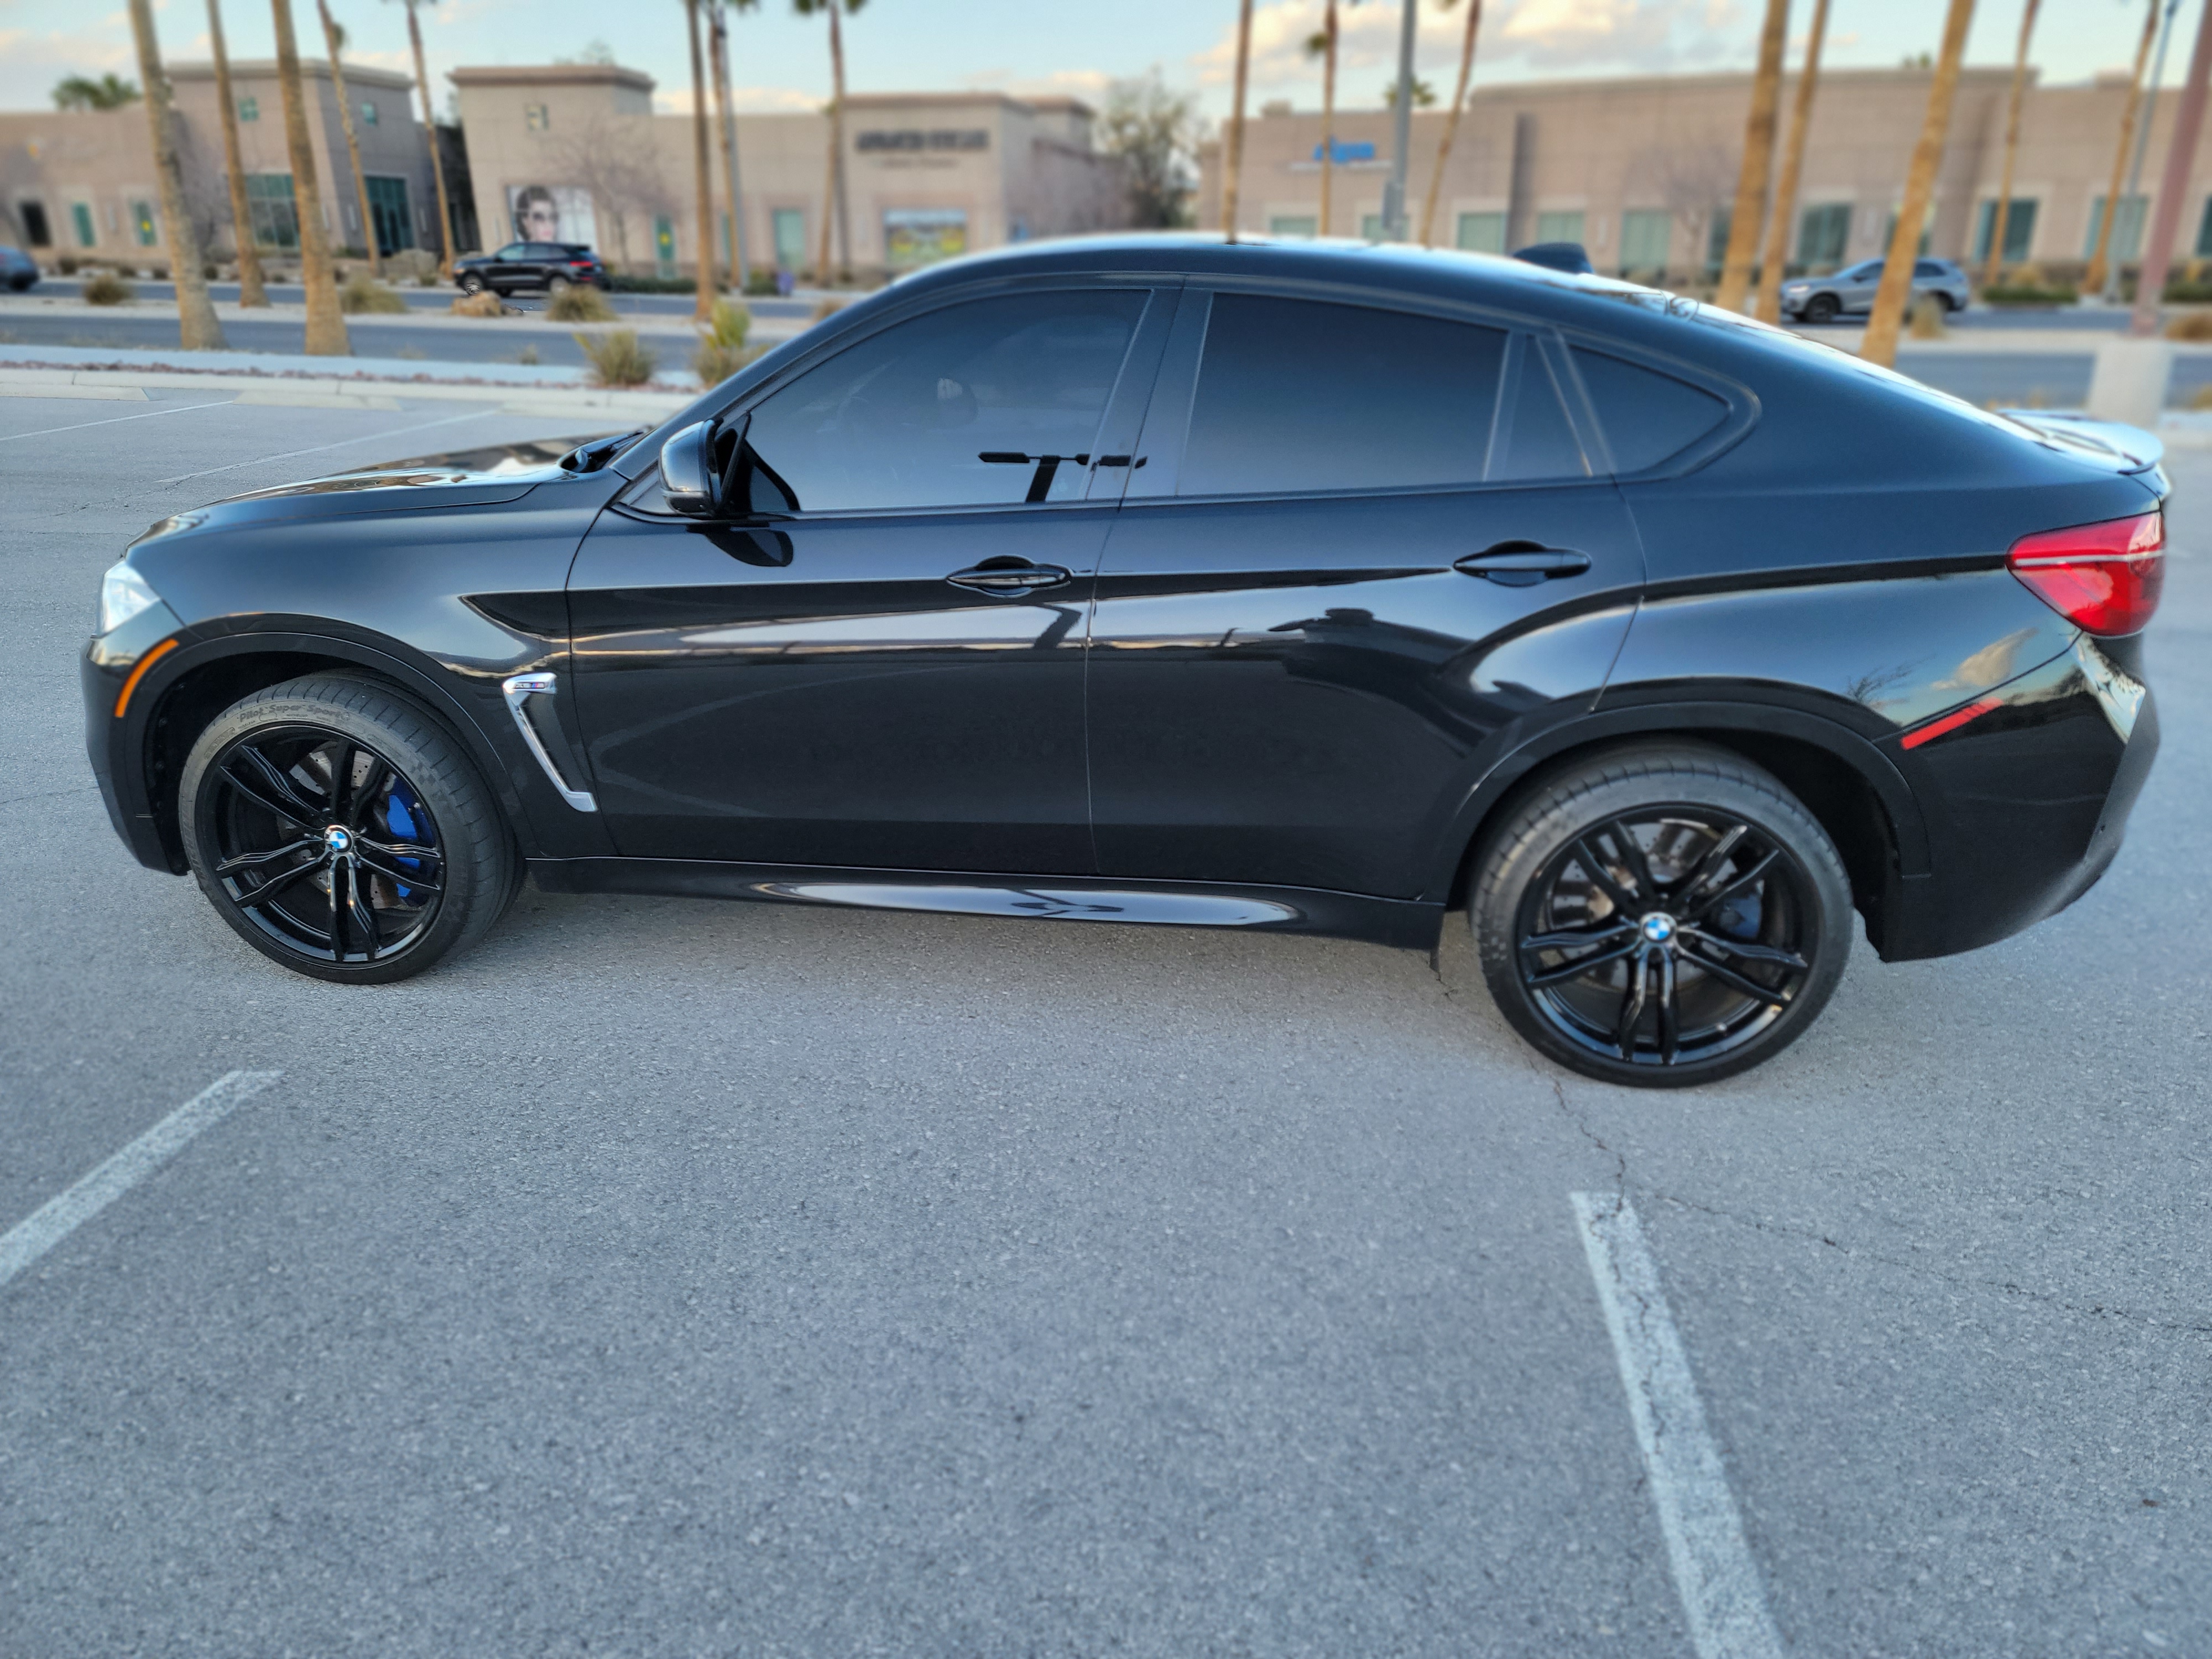 Used BMW X6 M for Sale Right Now - Autotrader